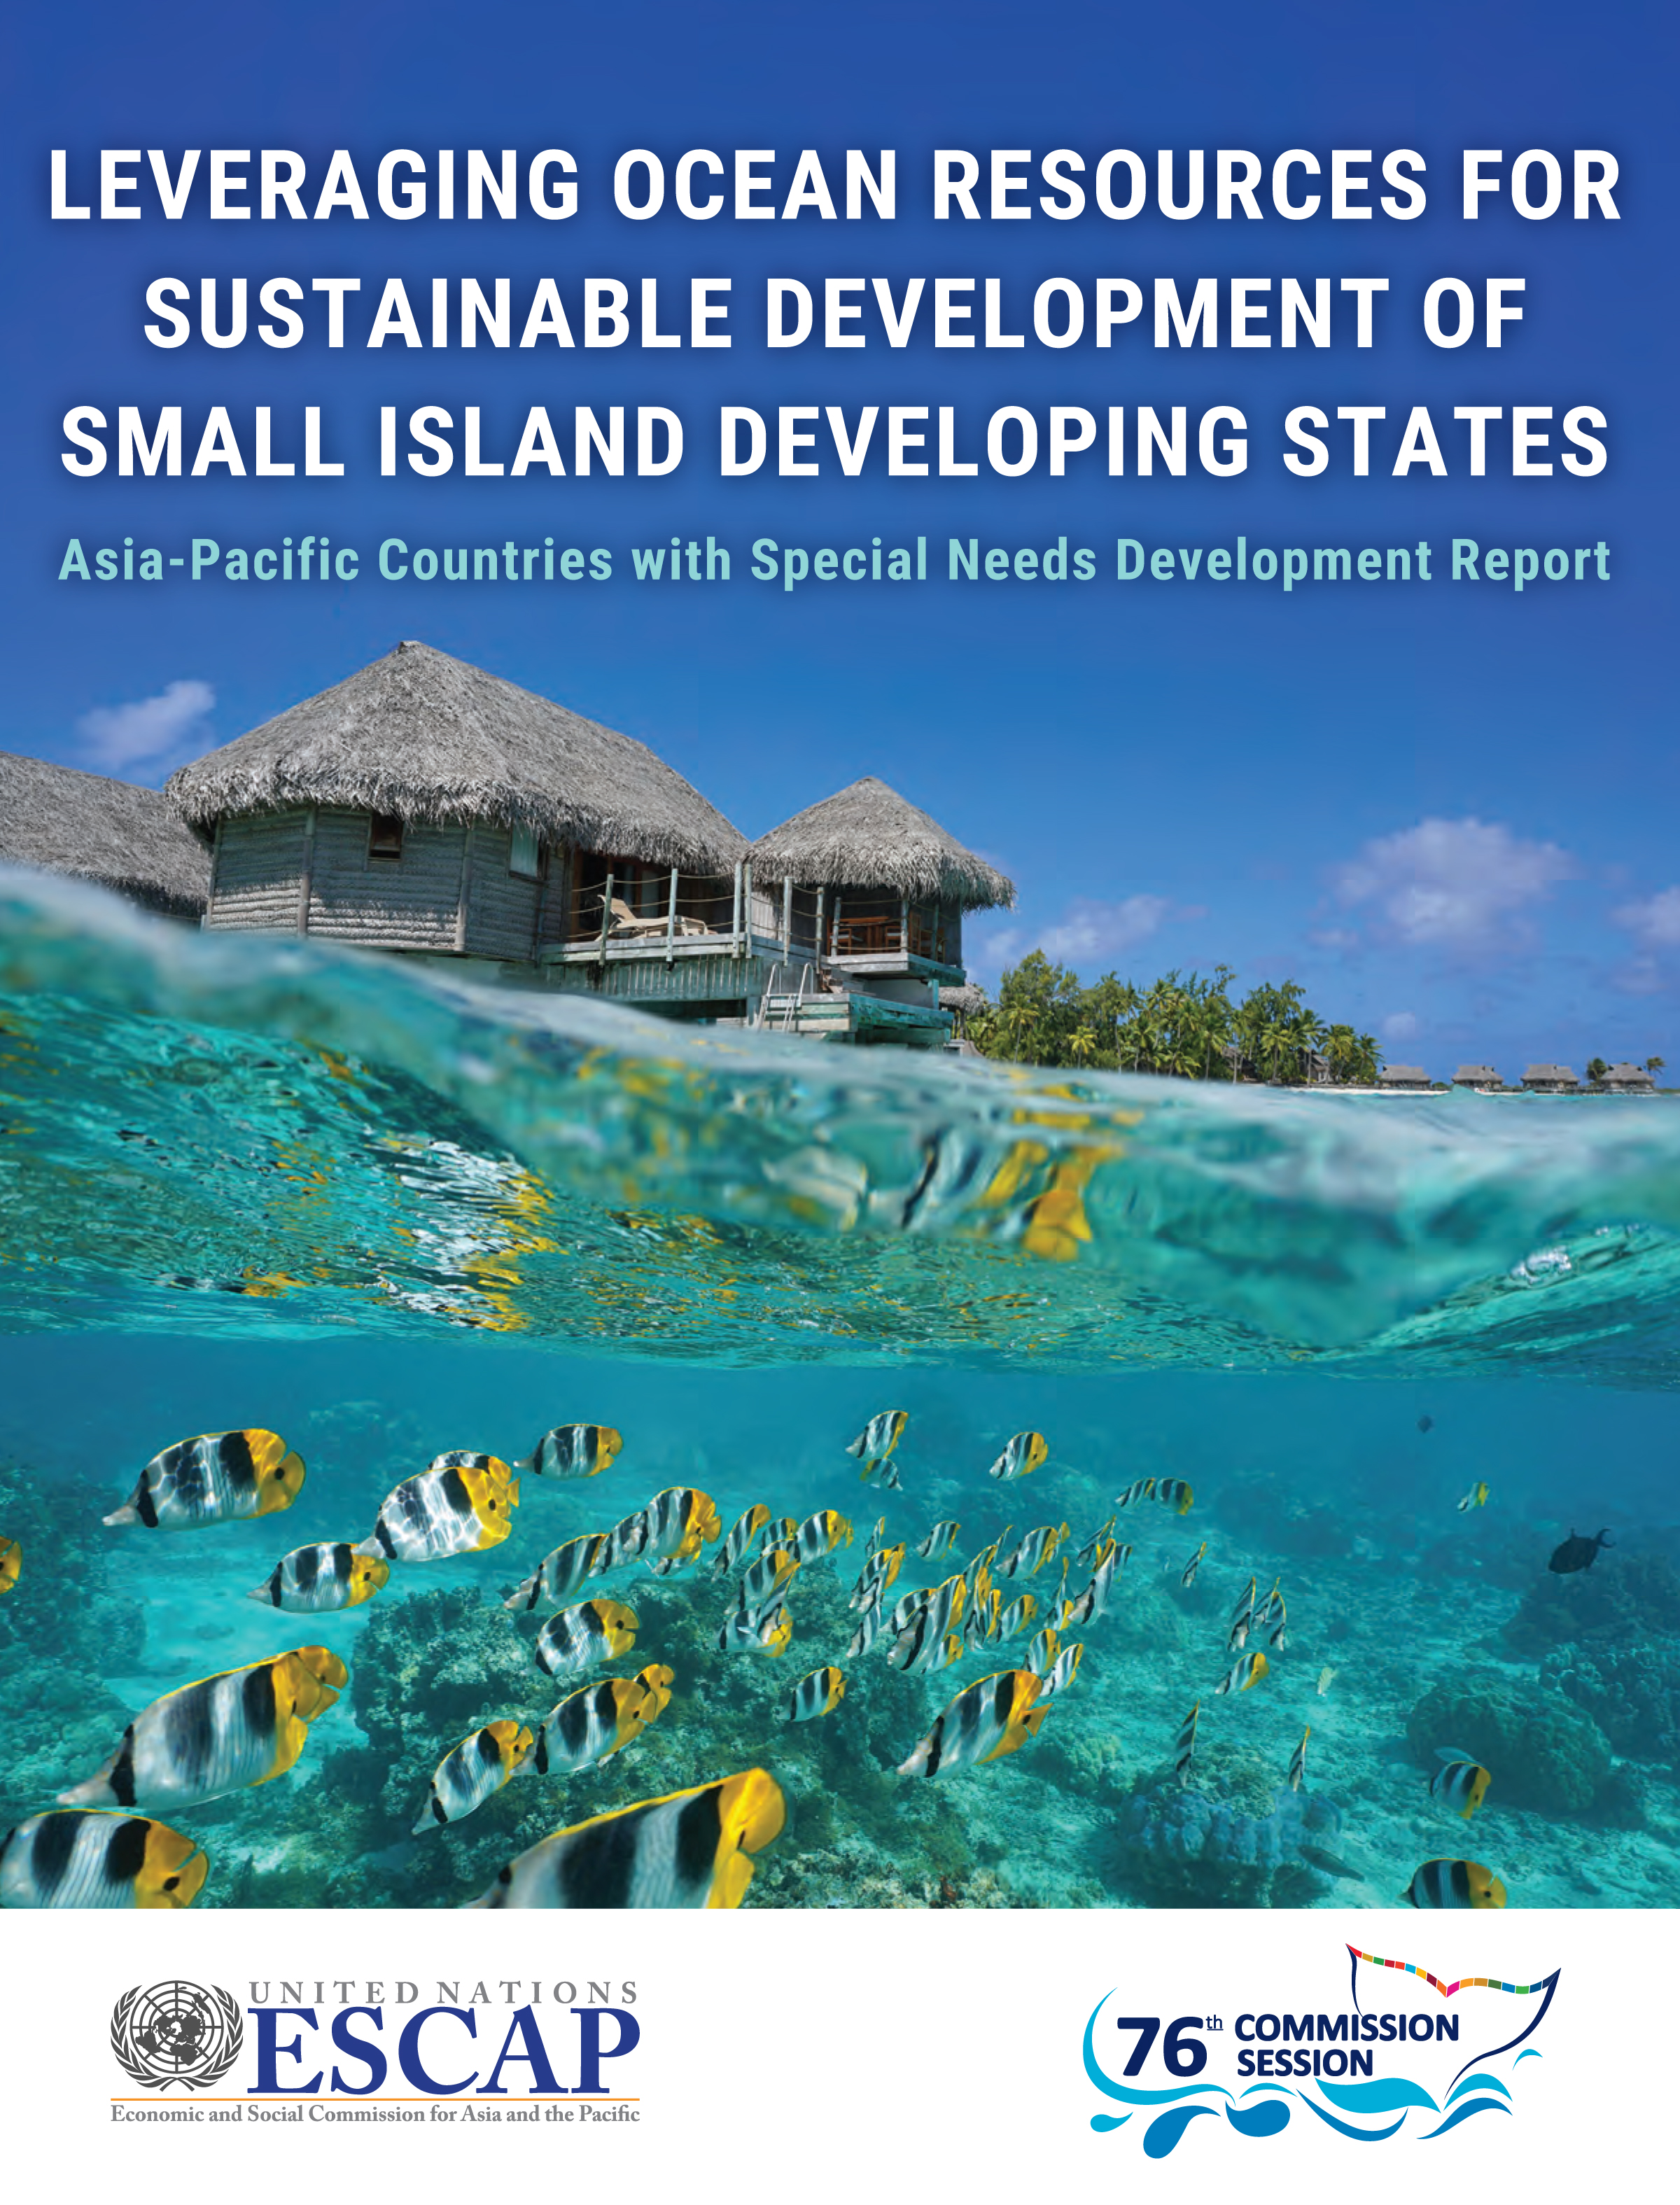 image of Fisheries as a driver of sustainable development in Asia-Pacific small island developing States